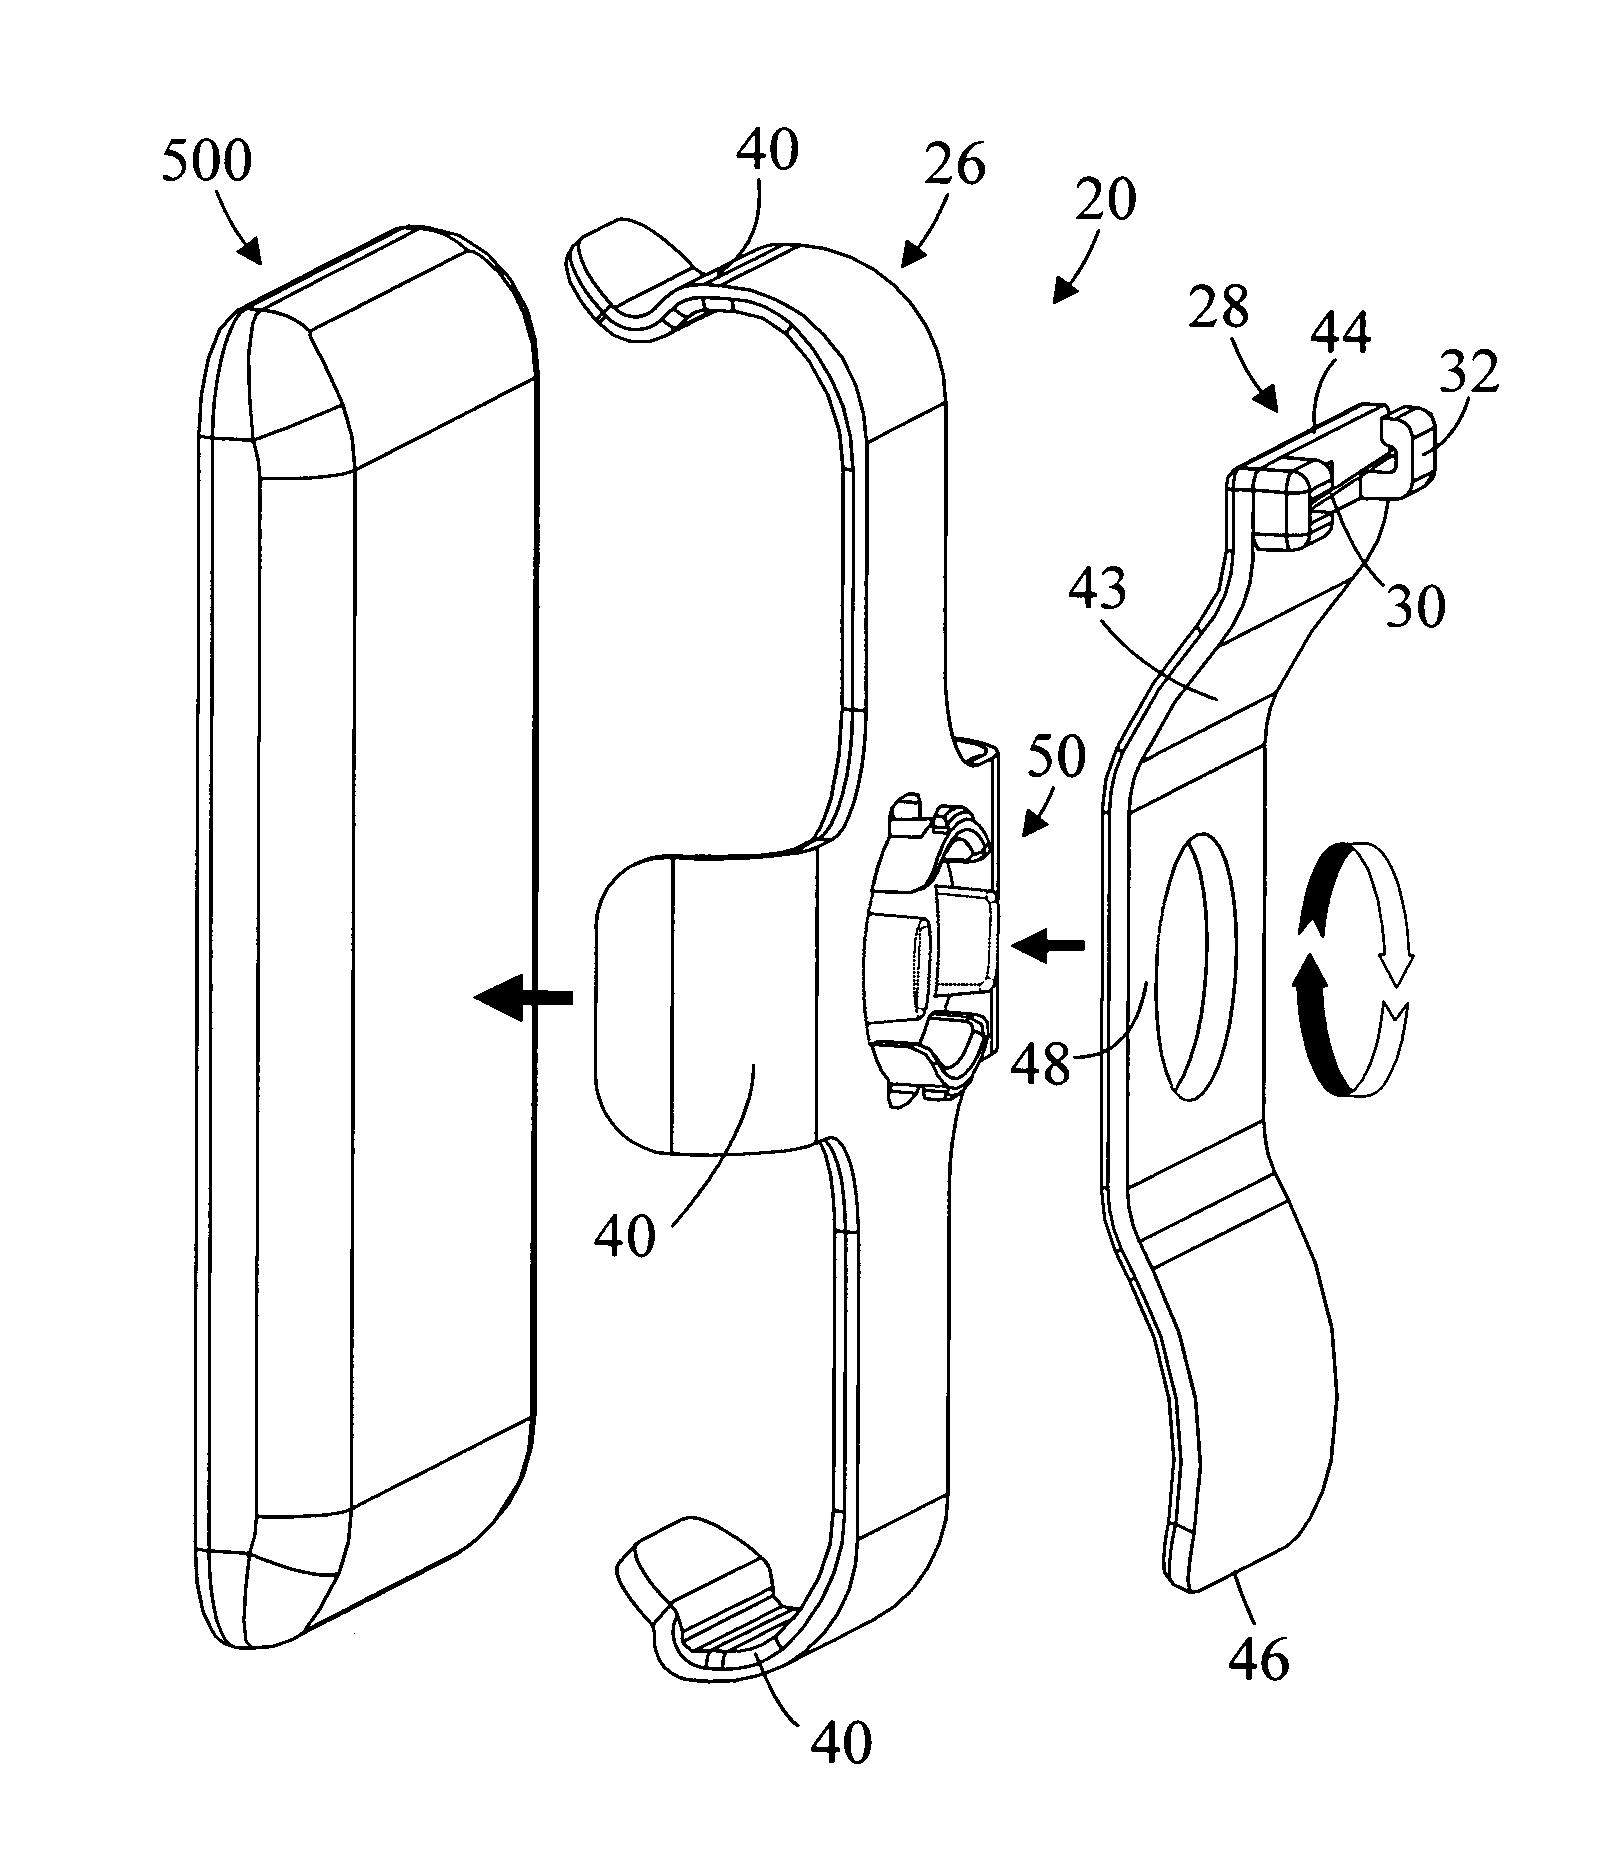 Method for attaching a hand held electronic device to a soft object and coupling therefor